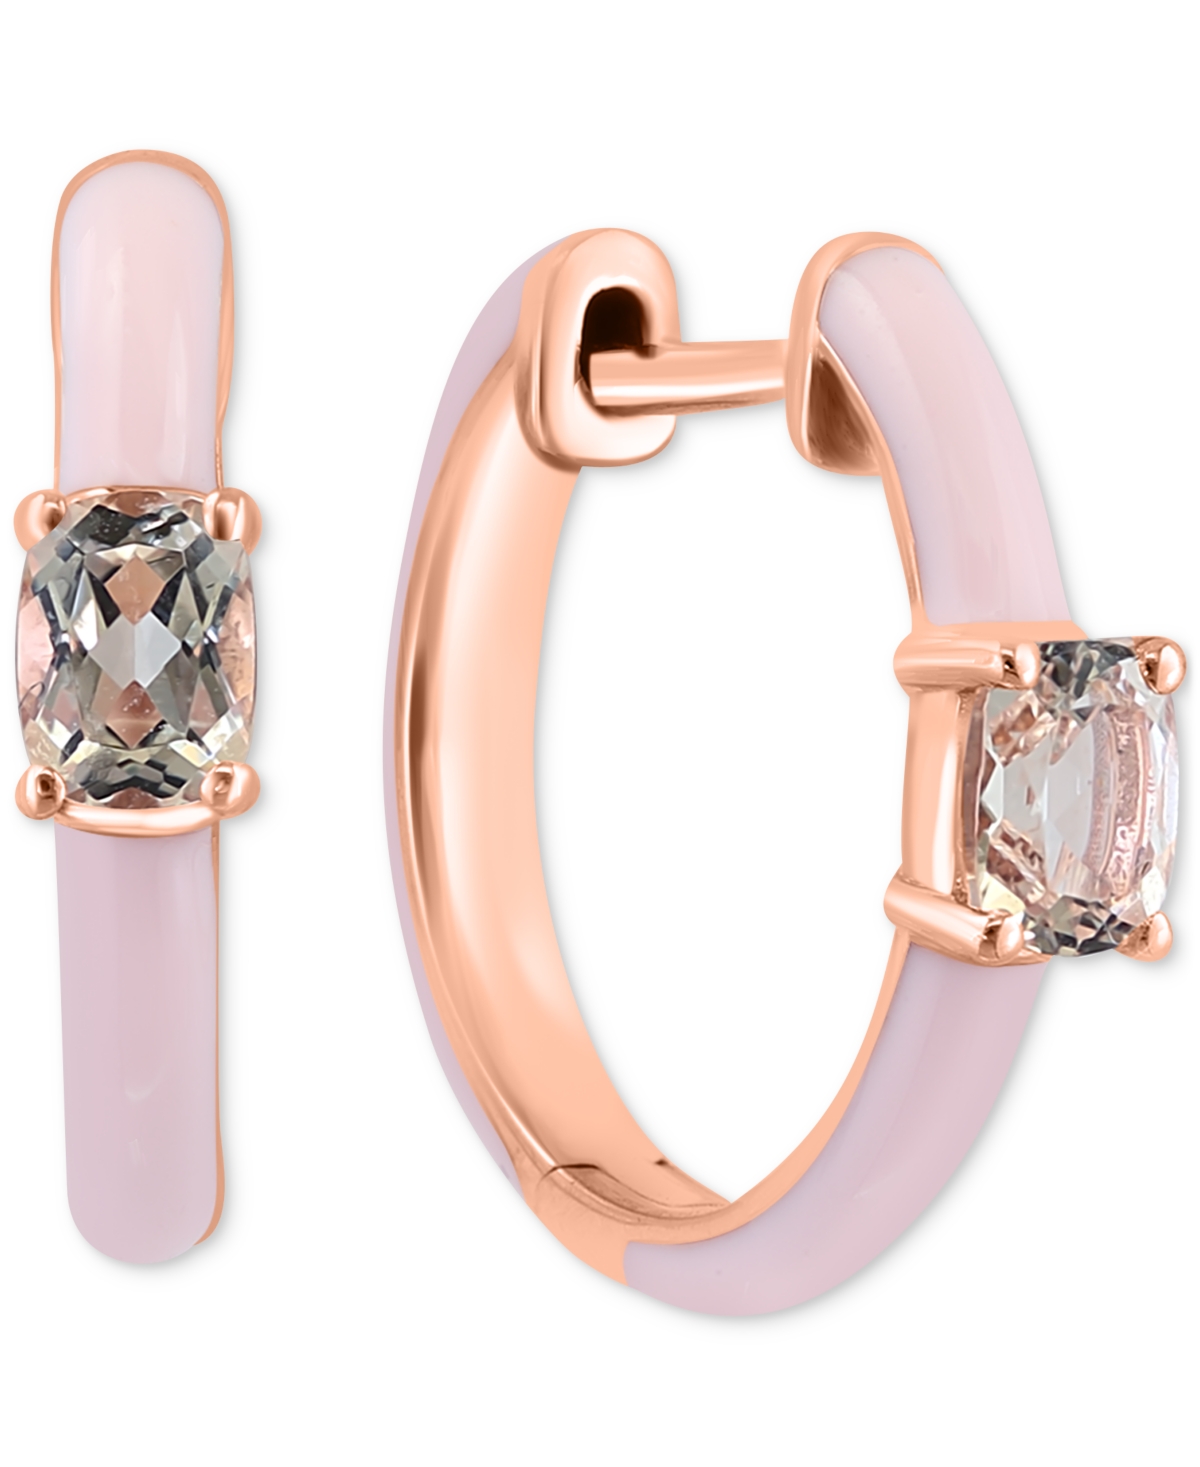 Effy Collection Effy Morganite (3/8 Ct. T.w.) & Pink Enamel Small Hoop Earrings In 14k Rose Gold-plated Sterling Sil In K Gold Over Sterling Silver